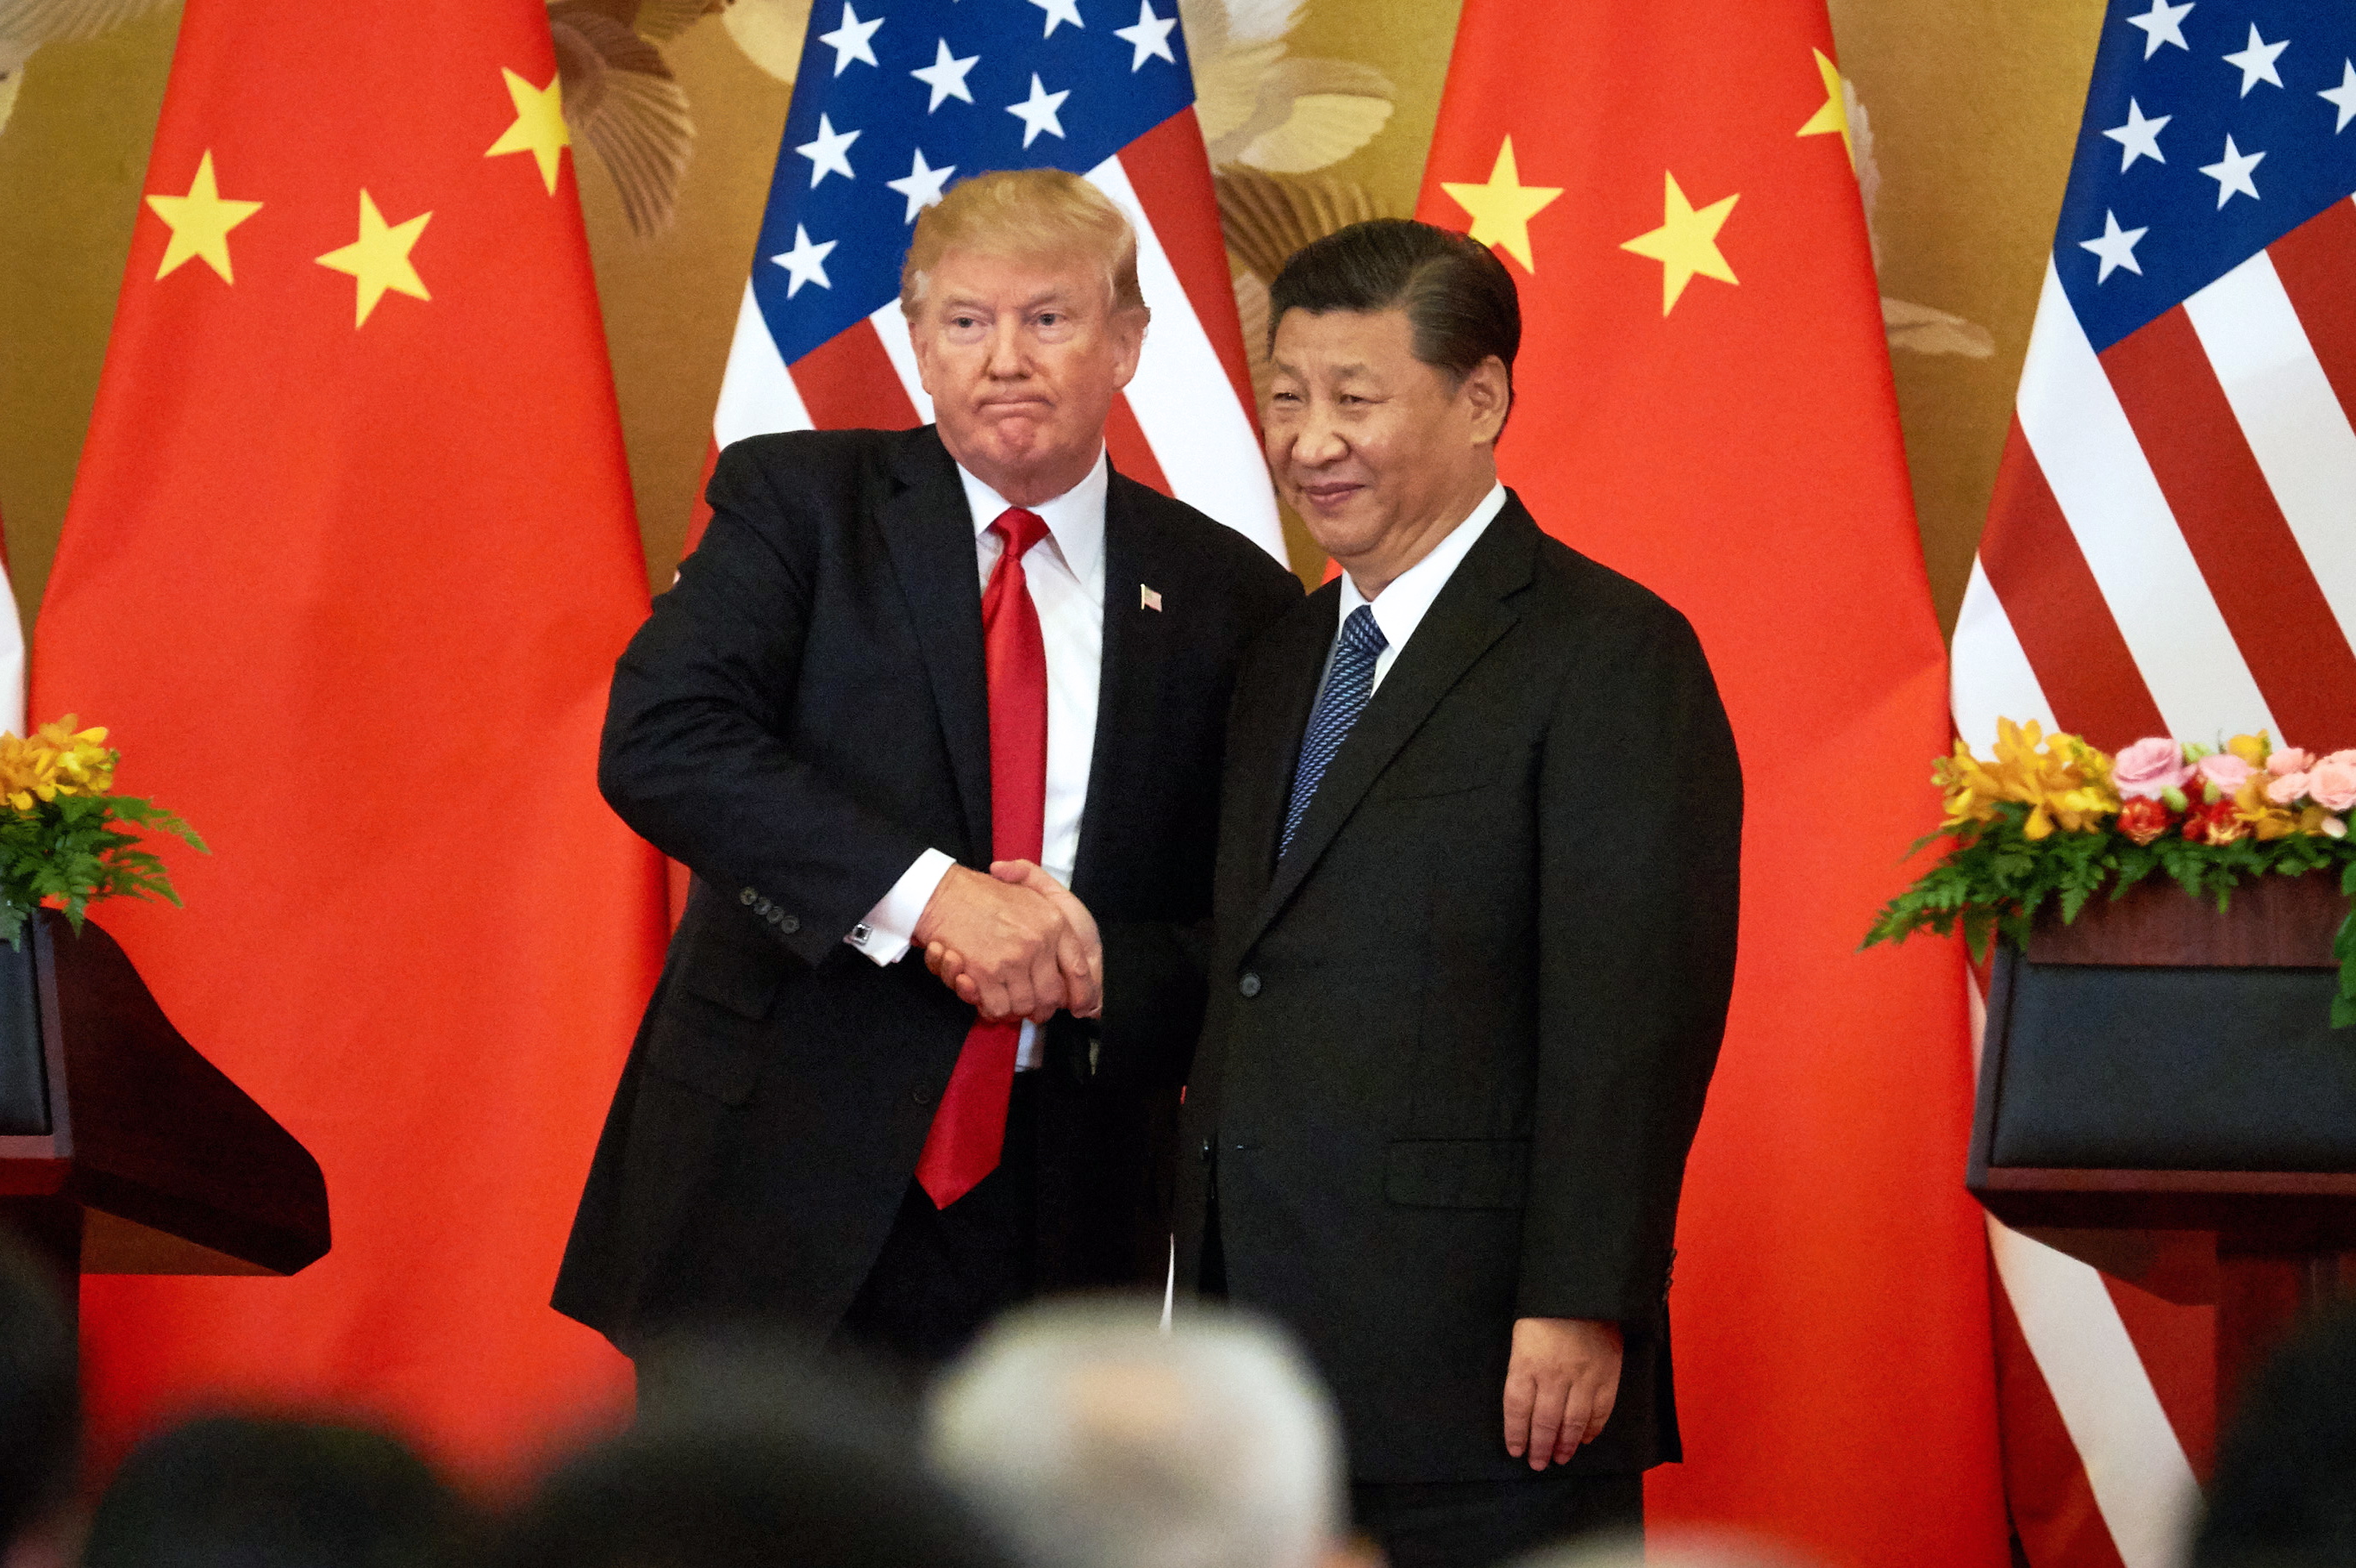 US President Donald Trump (L) and China's President Xi Jinping shake hands at a press conference following their meeting at the Great Hall of the People in Beijing. (Artyom Ivanov&mdash;Artyom Ivanov/TASS)